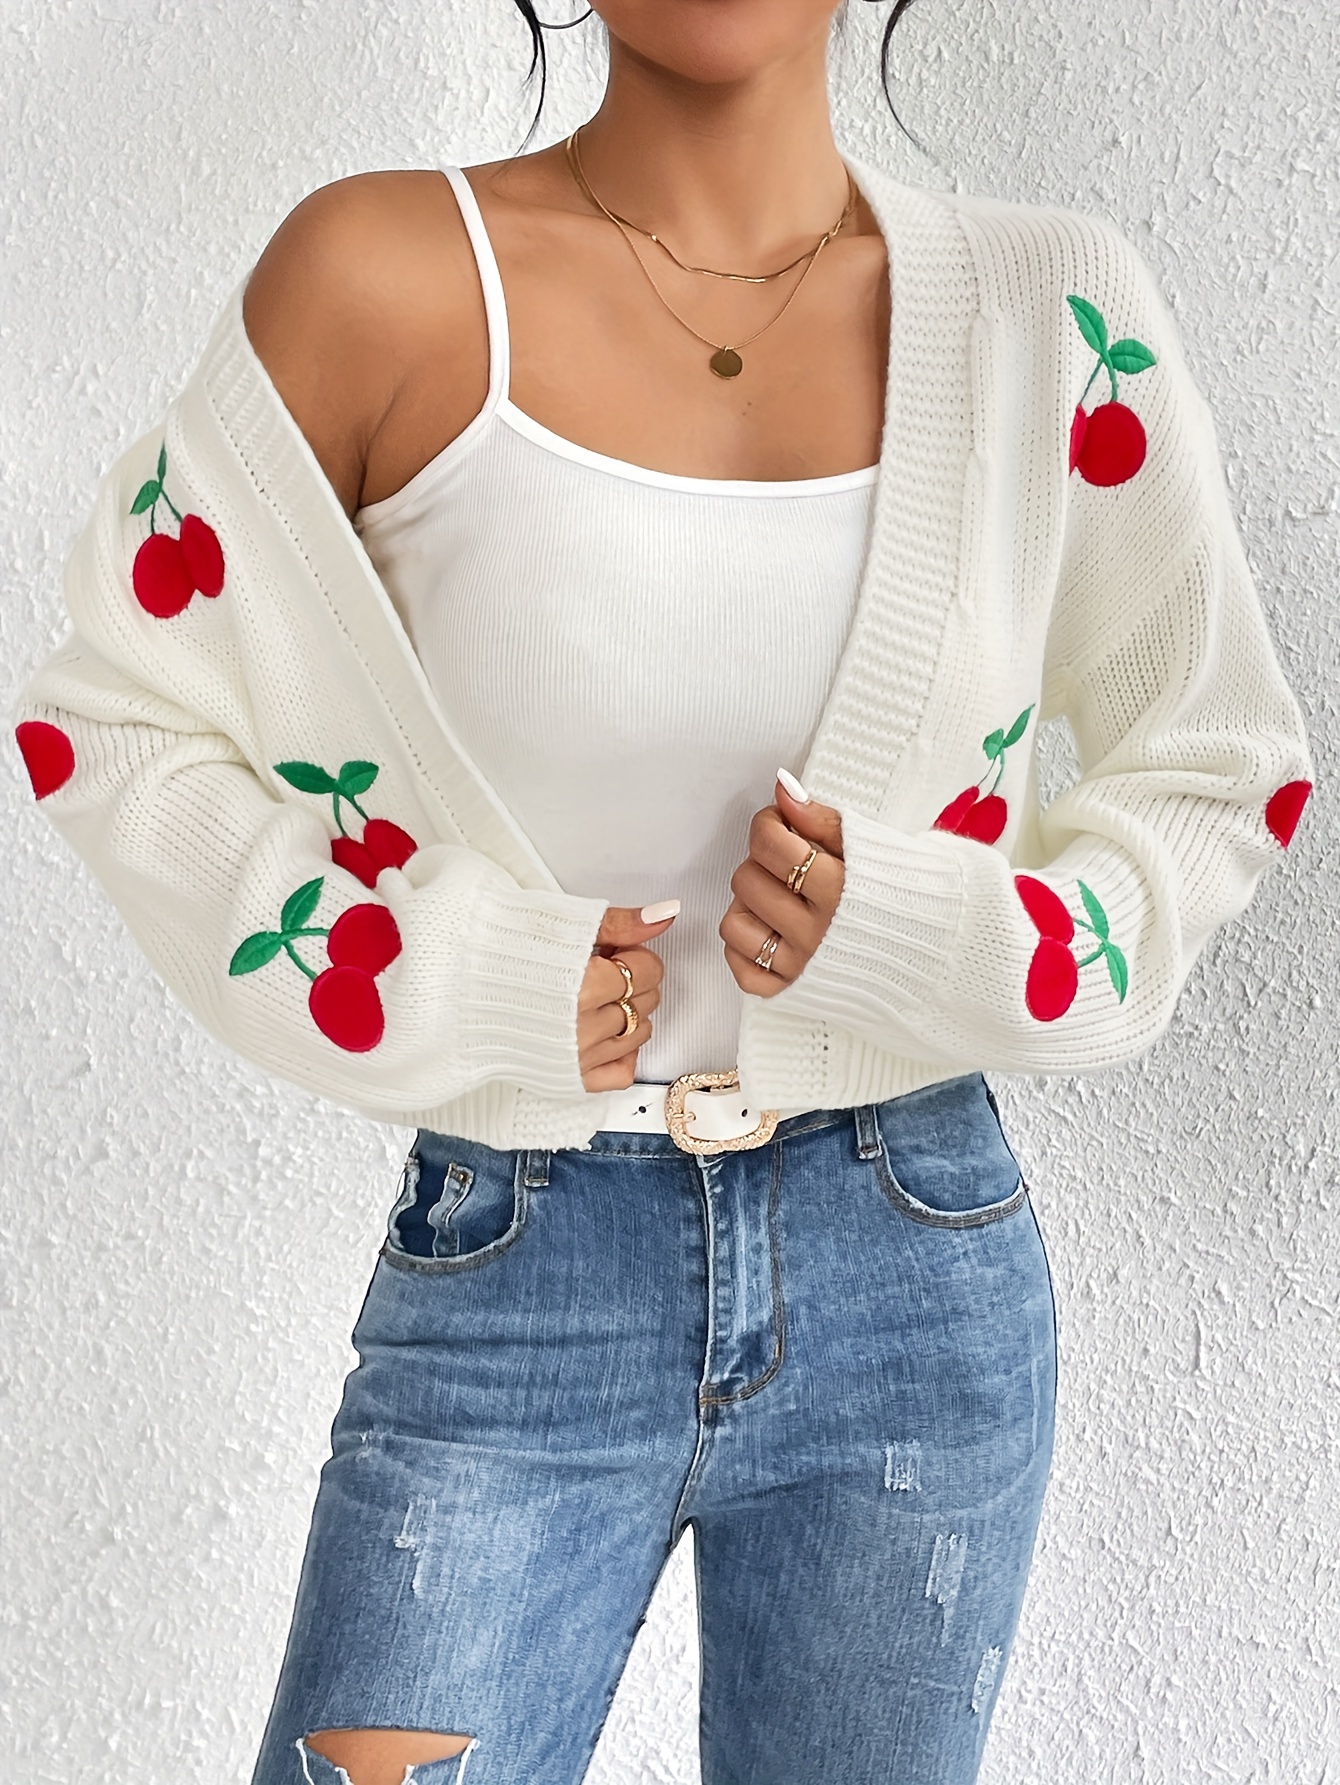 Chunky Cropped Floral Cardigan, Oversize Flower Knitted Sweater, Oversize  Wool Cardigan With Daisies, Hand-knitted Oversized Daisy Sweater -   Canada